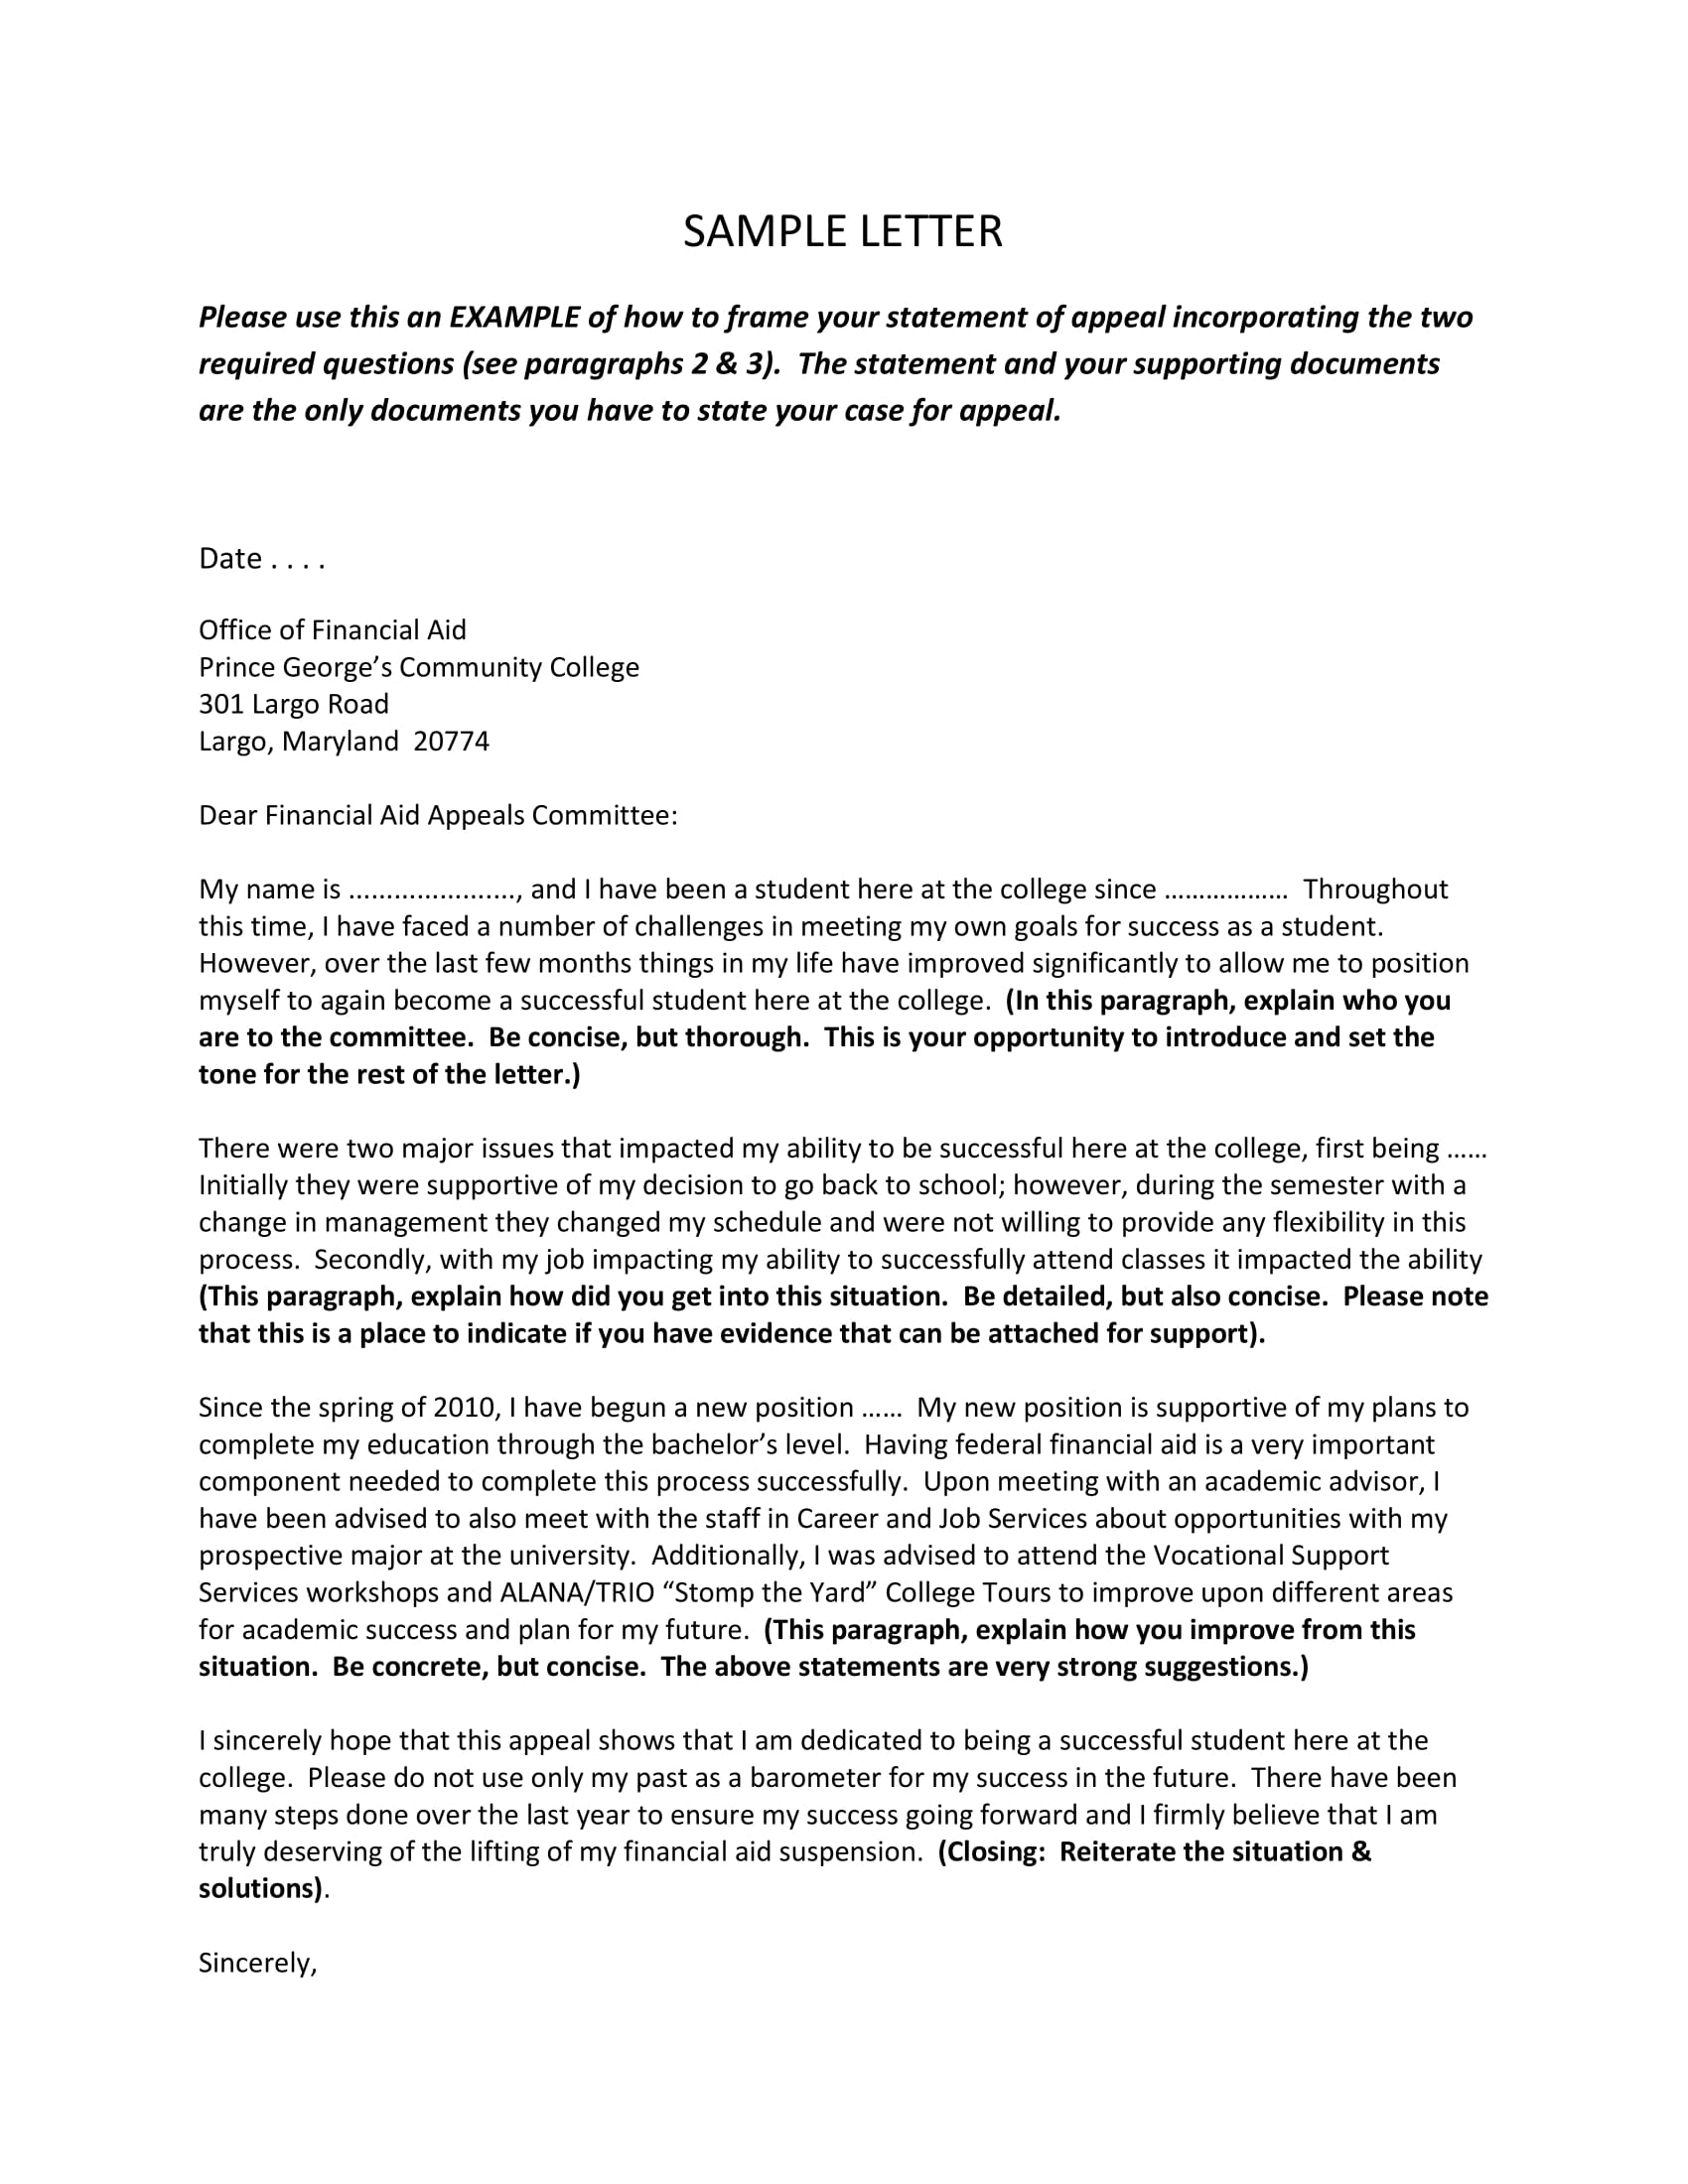 17+ Official Statement Letter Format Examples - PDF, DOC  Examples